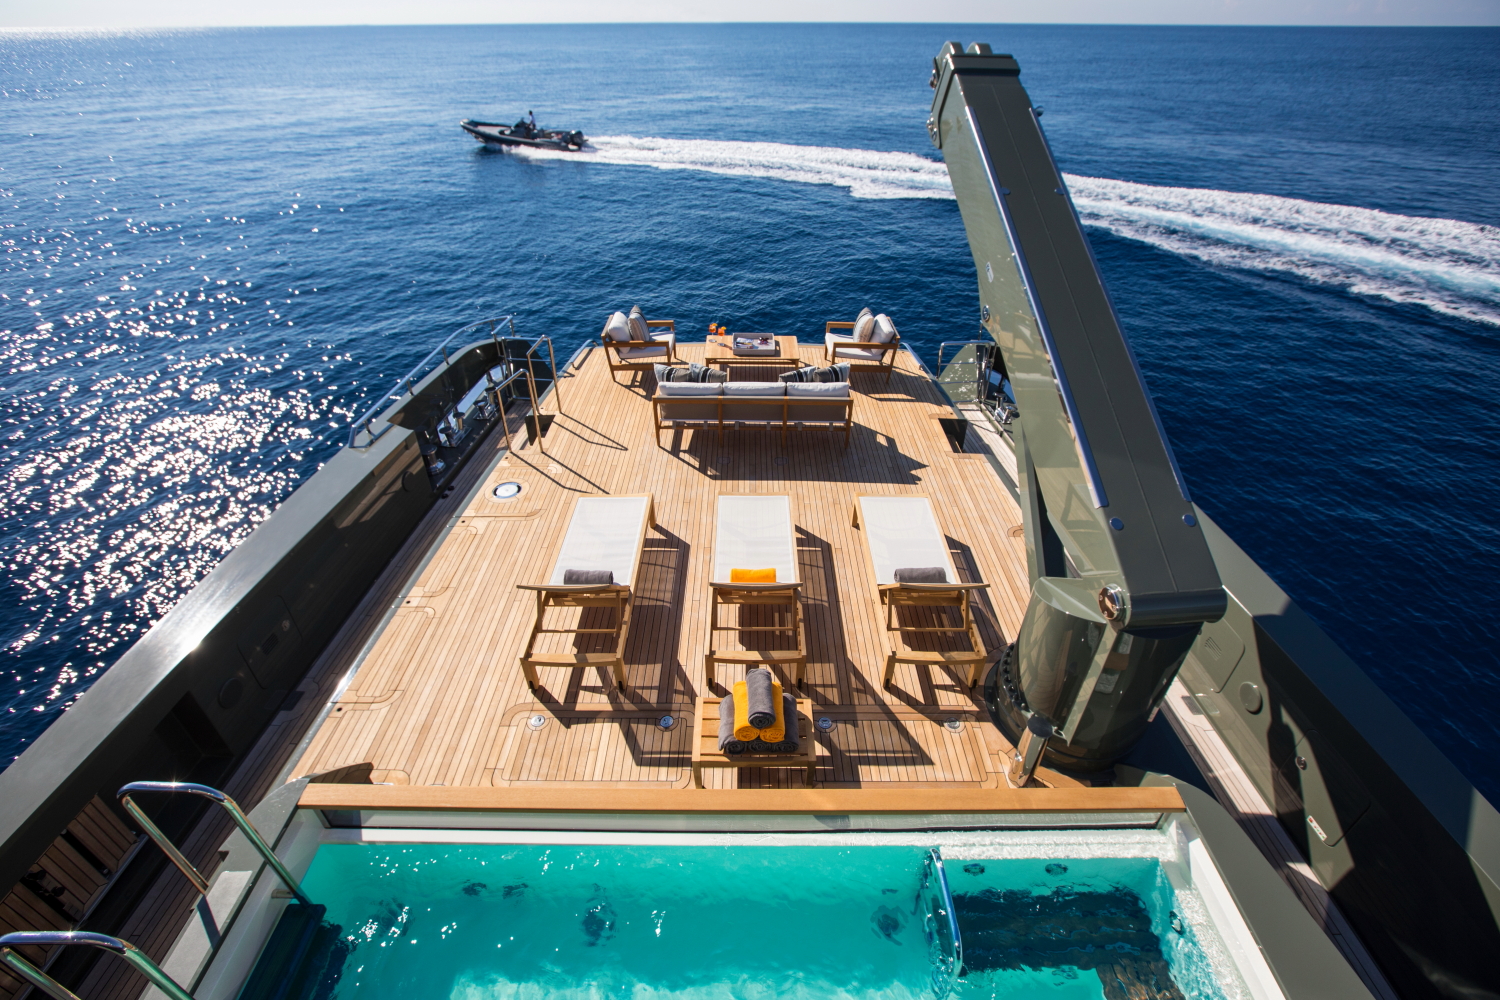 Spacious aft deck with swimming pool